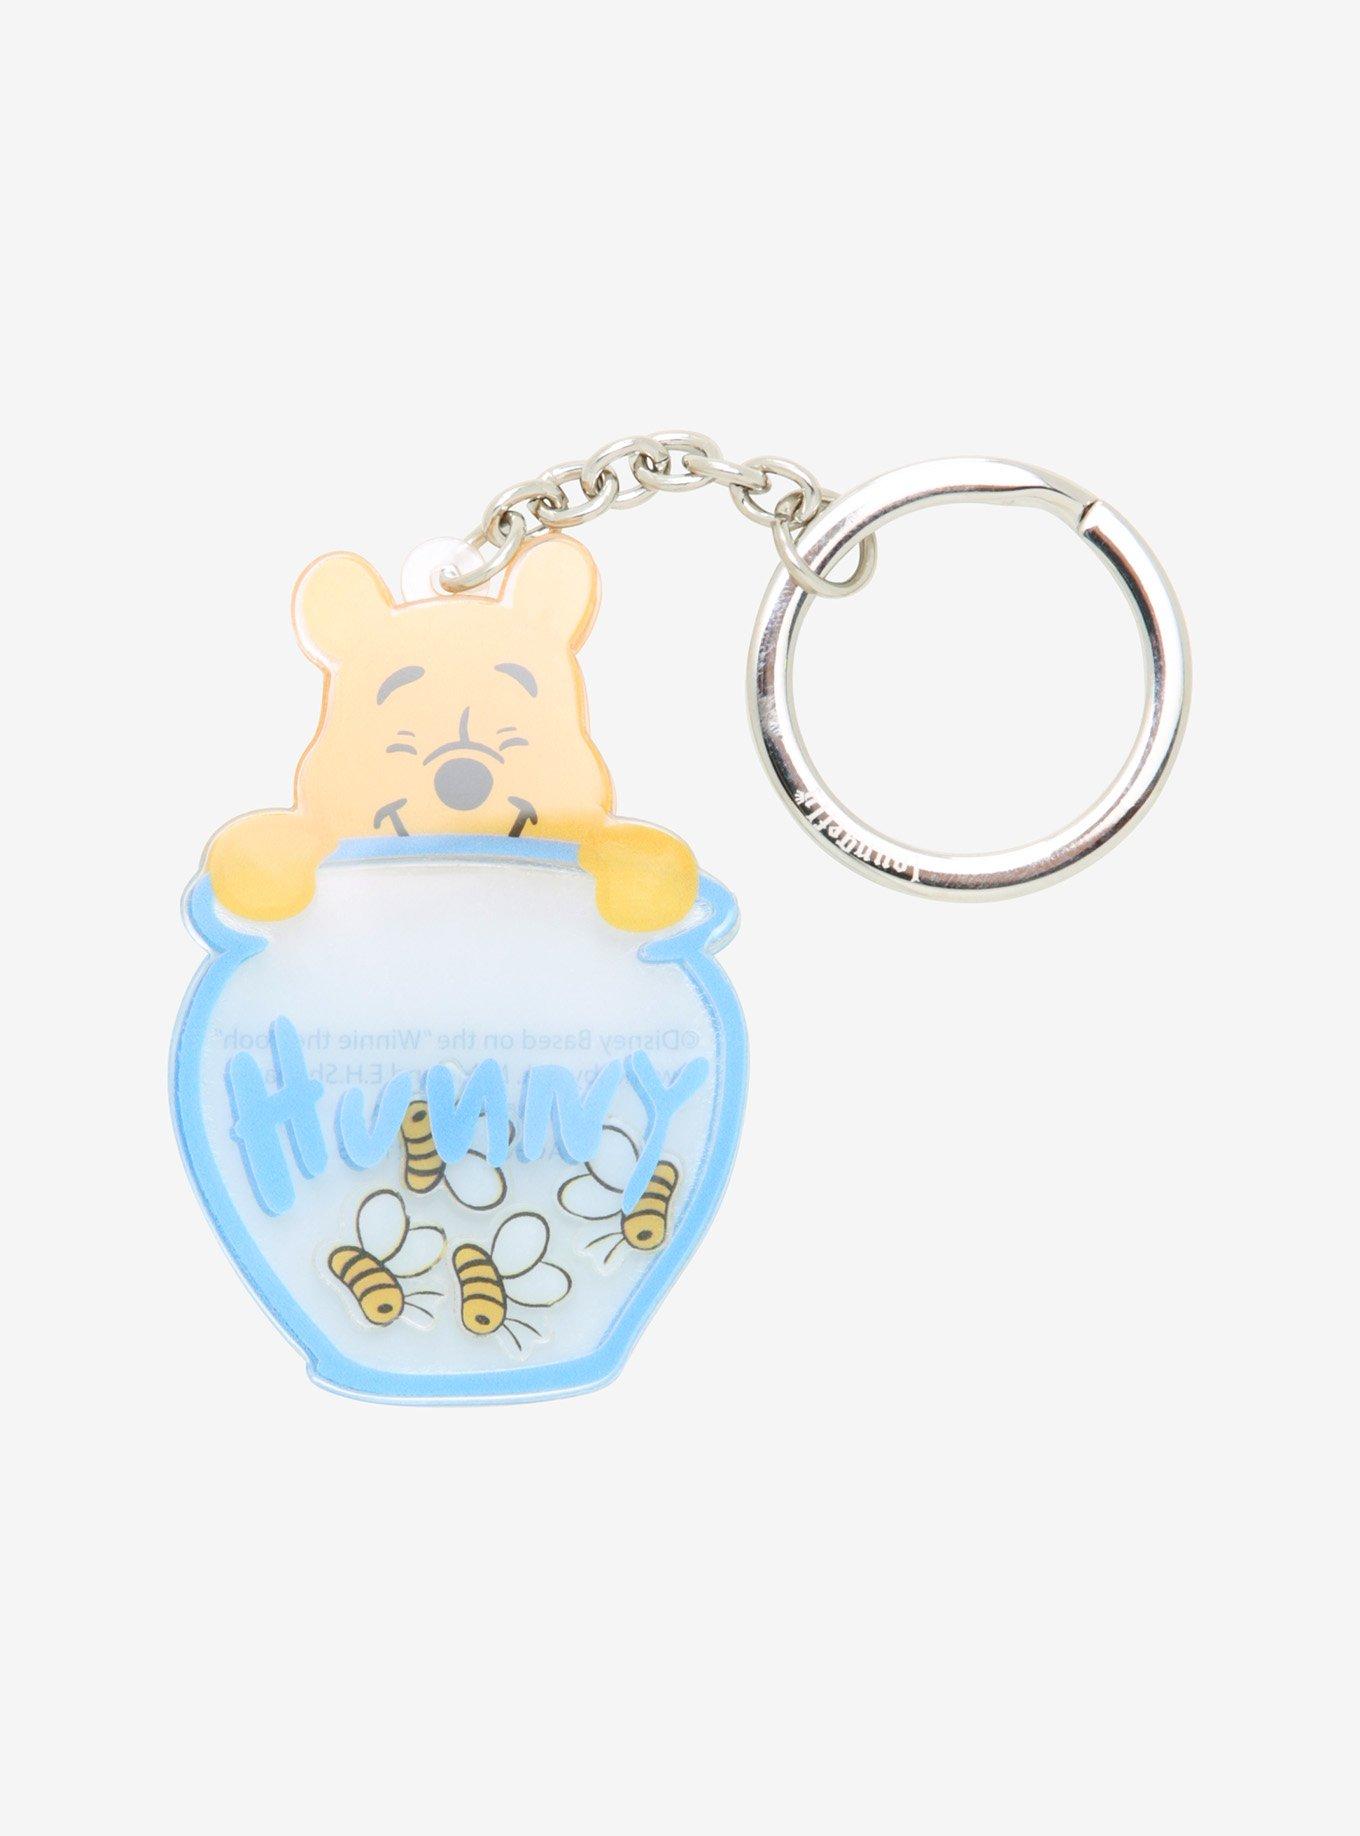 Winnie the Pooh NEW Pooh with Honey Clip Blind Bag Monogram Key Chain 